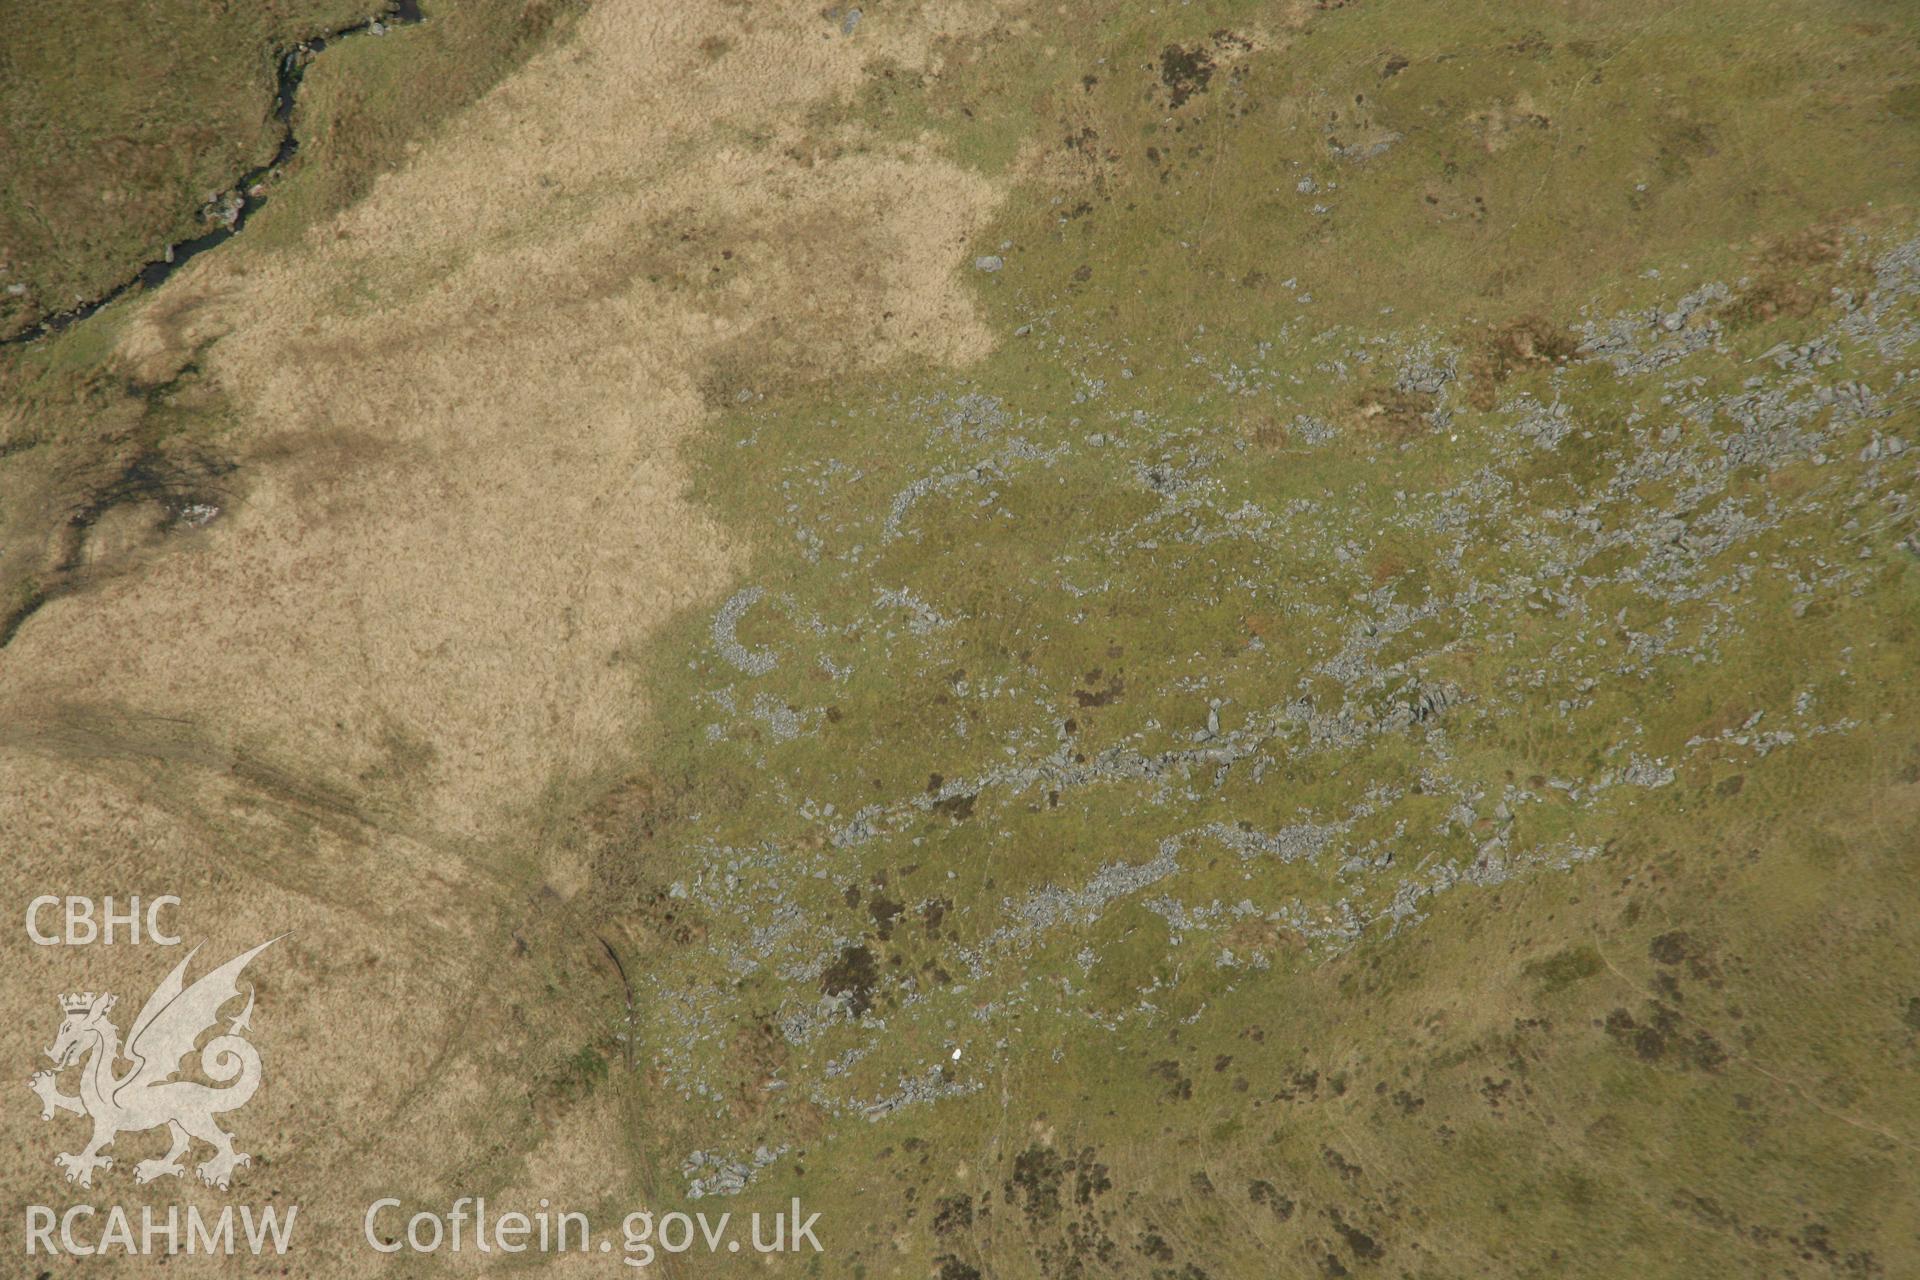 RCAHMW colour oblique aerial photograph of a hut circle settlement below Foel Isaf, Bugeilyn. Taken on 17 April 2007 by Toby Driver